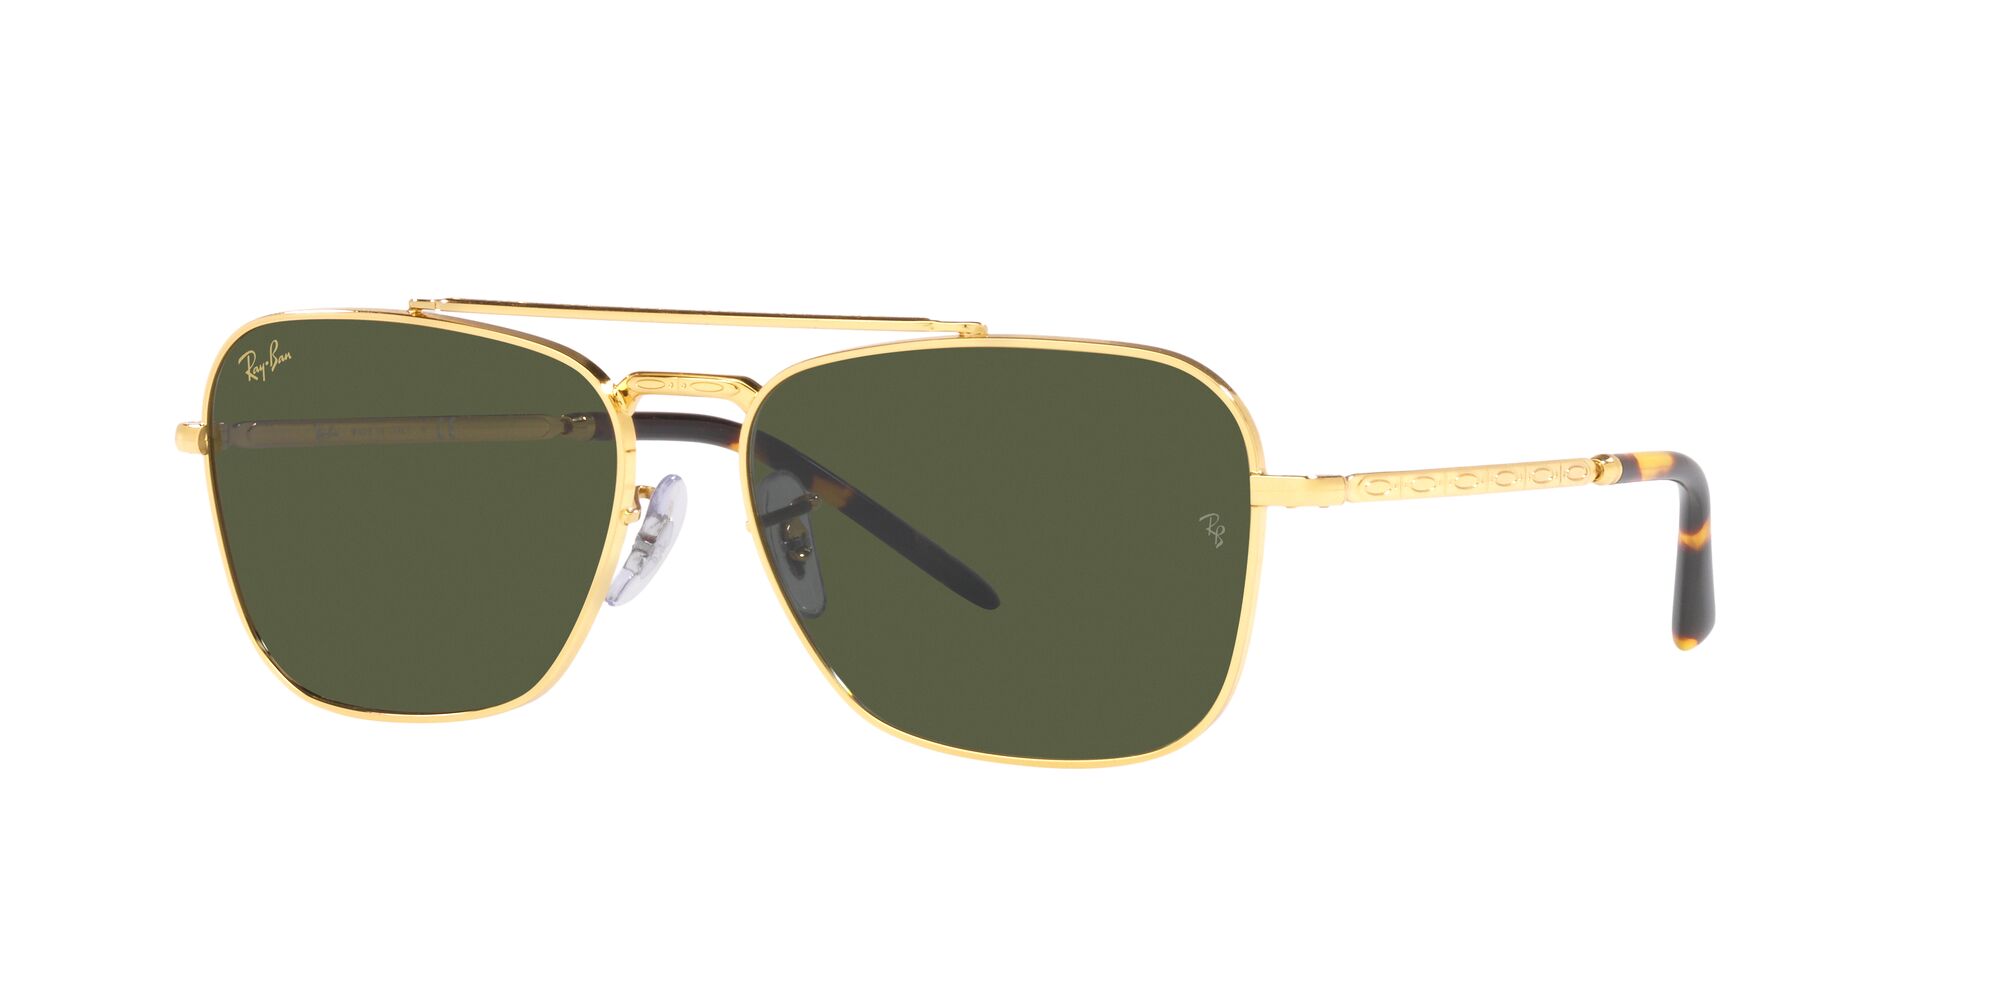 Sunglass Hut® South Africa Online Store | Products | Ray-Ban